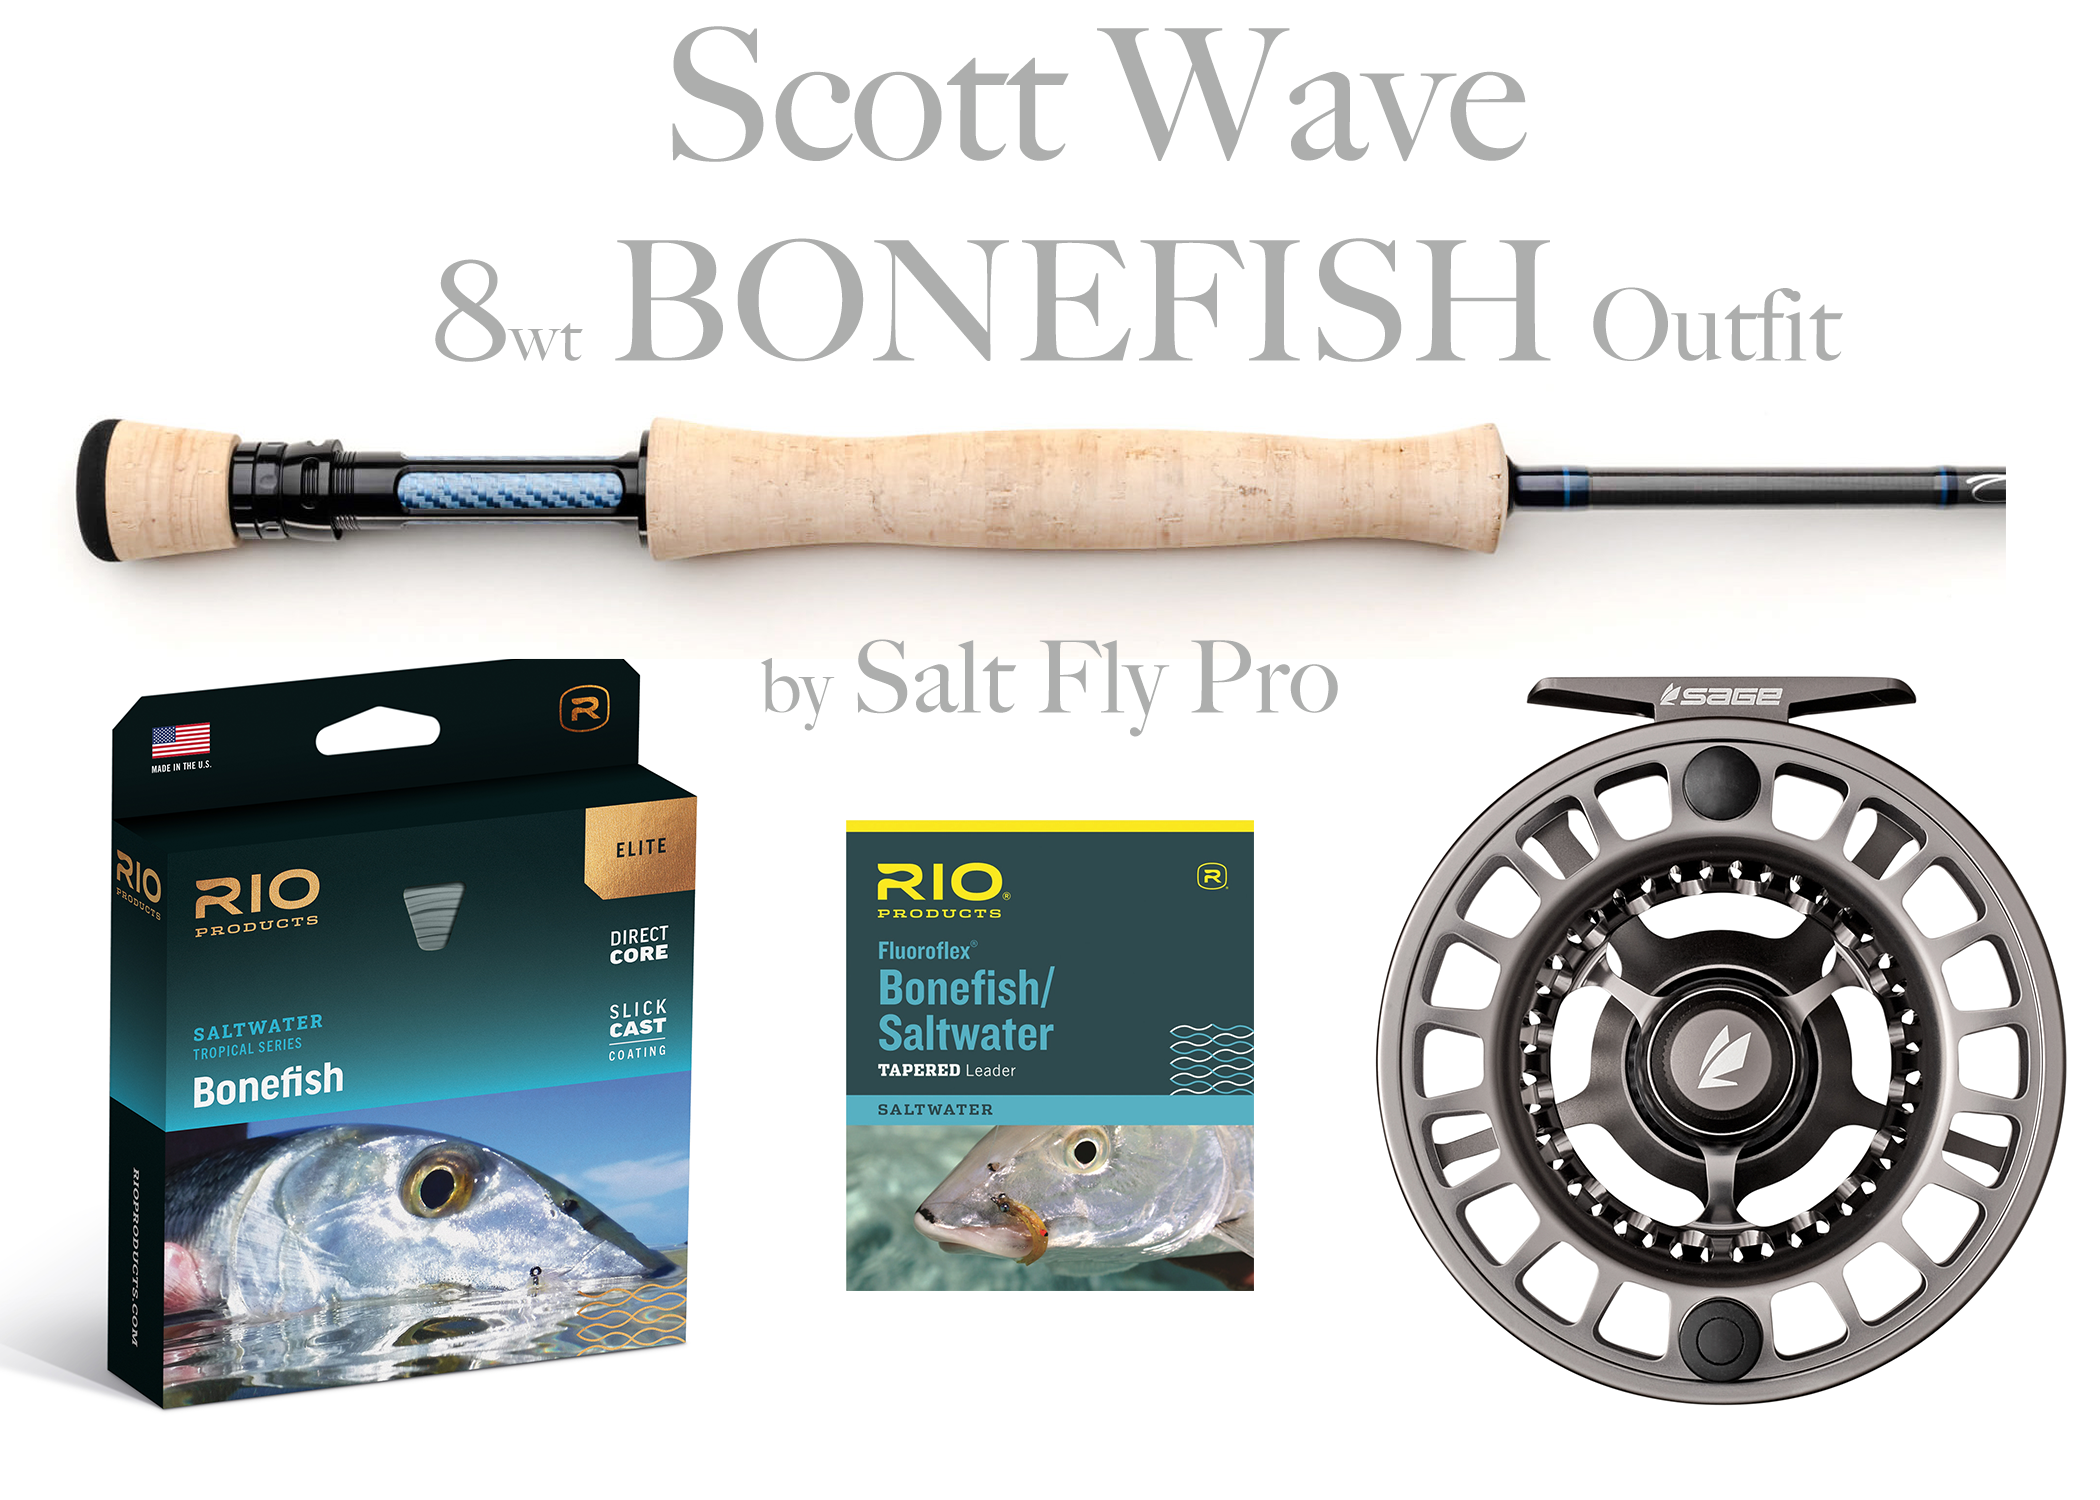 Scott WAVE 9wt BONEFISH & PERMIT Outfit Combo - NEW!